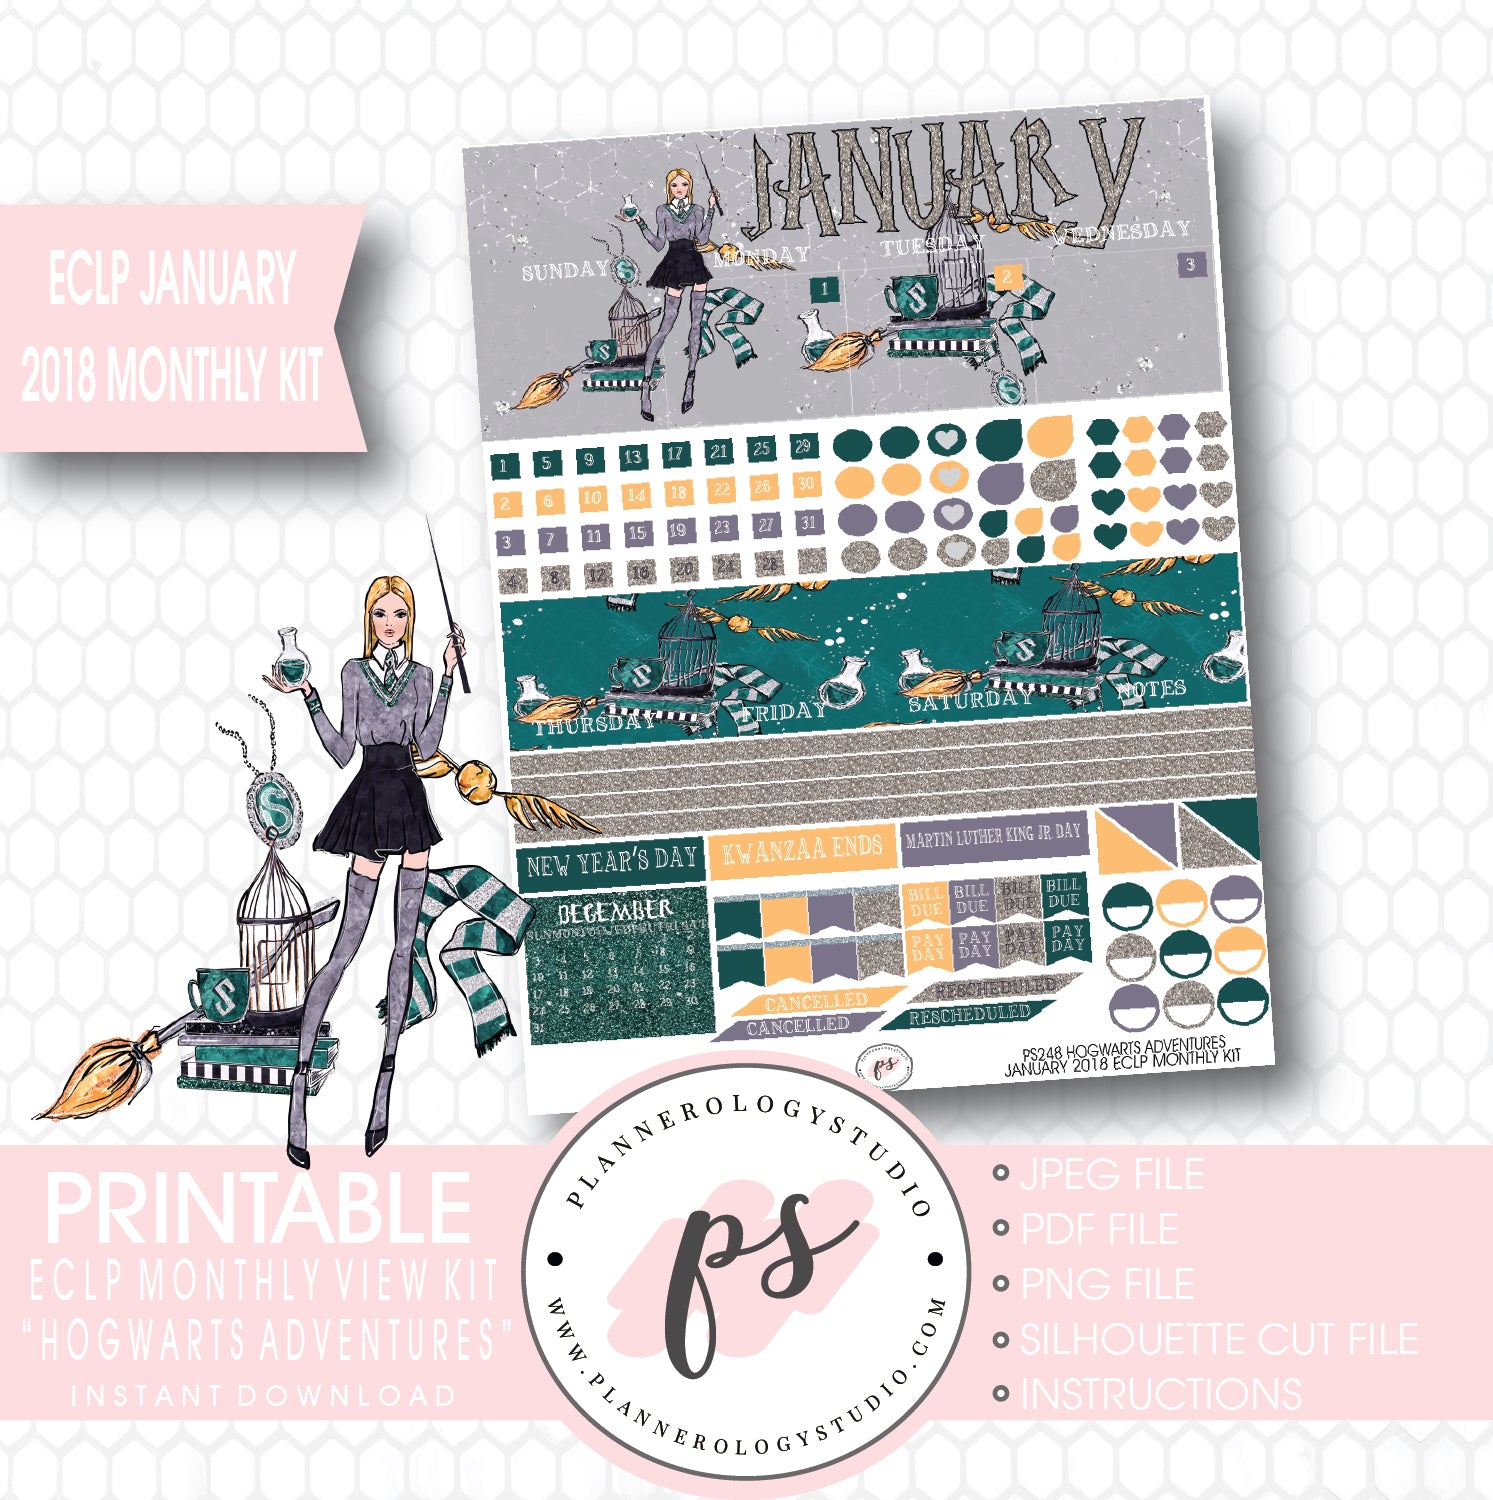 Hogwarts Adventures (Harry Potter Theme) January 2018 Monthly View Kit Printable Planner Stickers (for use with ECLP) - Plannerologystudio